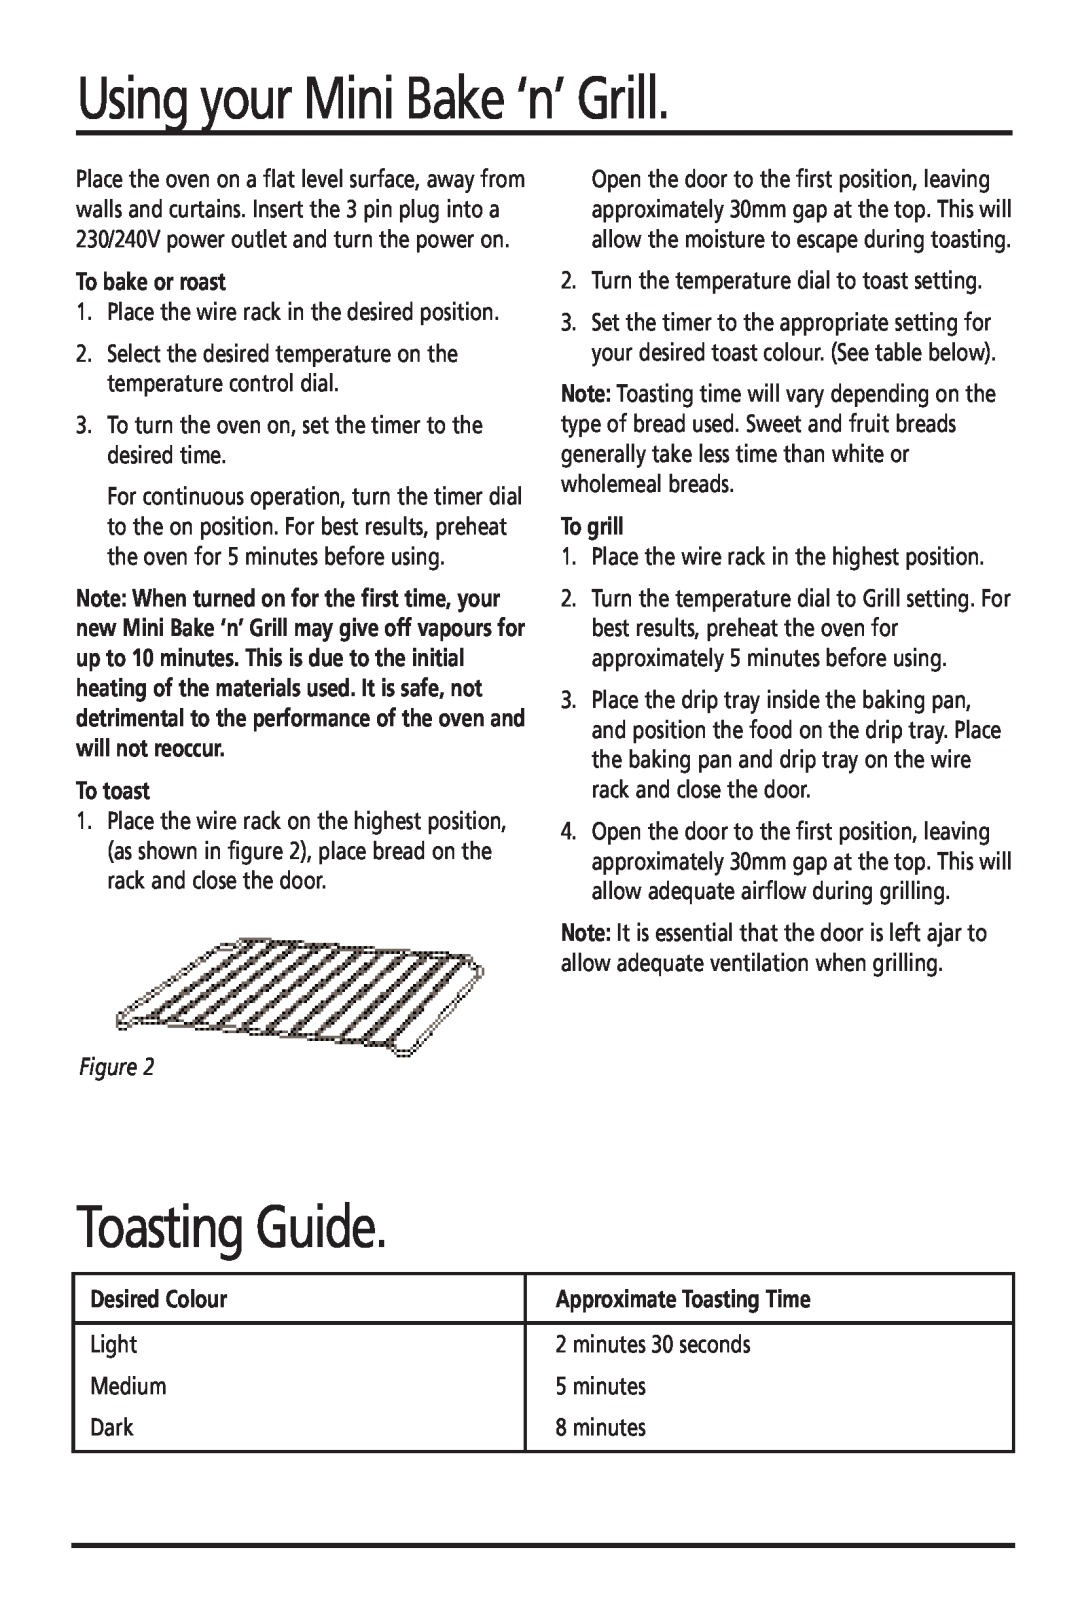 Sunbeam BR2500 manual Using your Mini Bake ‘n’ Grill, Toasting Guide, To bake or roast, To toast, To grill, Desired Colour 